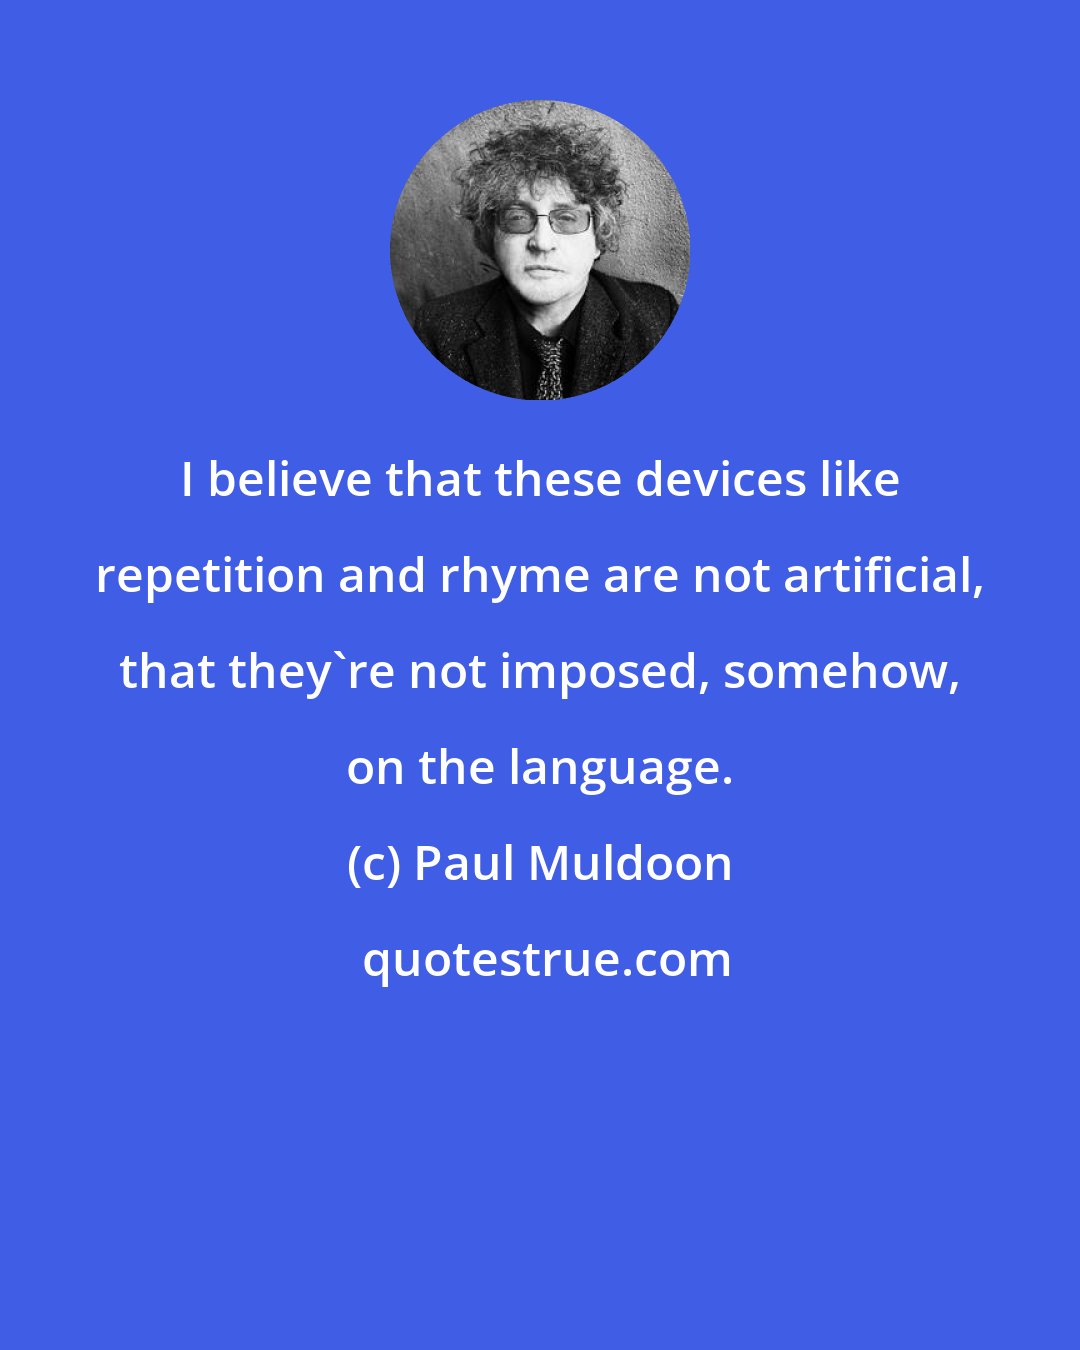 Paul Muldoon: I believe that these devices like repetition and rhyme are not artificial, that they're not imposed, somehow, on the language.